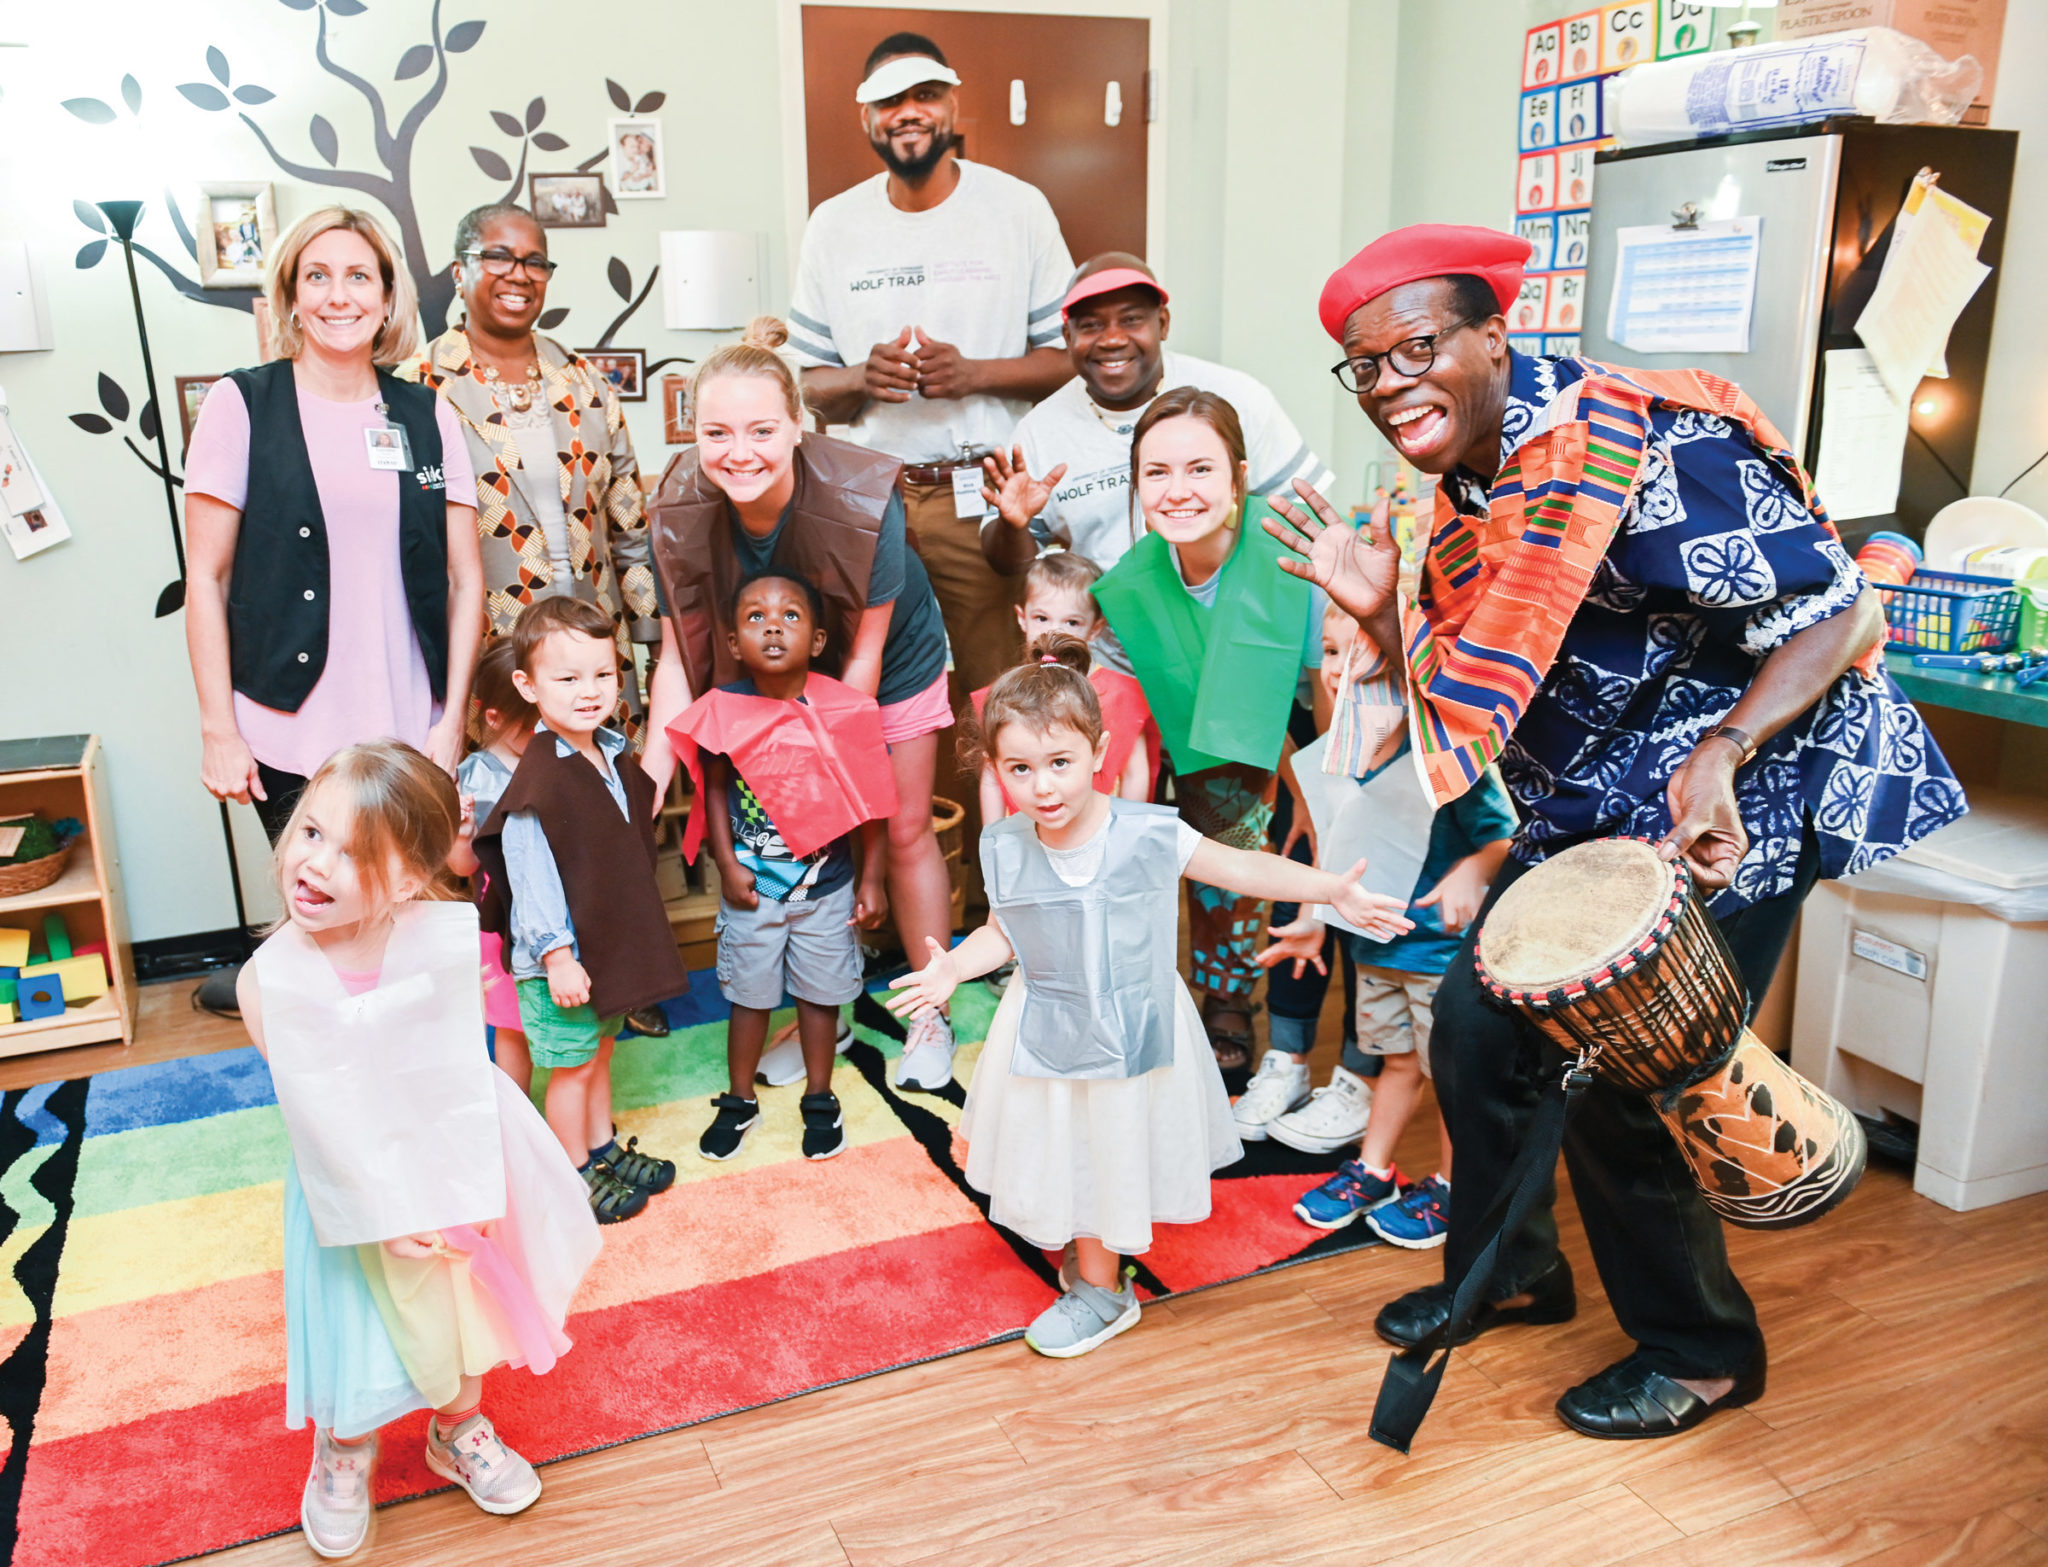 Young preschool children in costume with educators and musicians